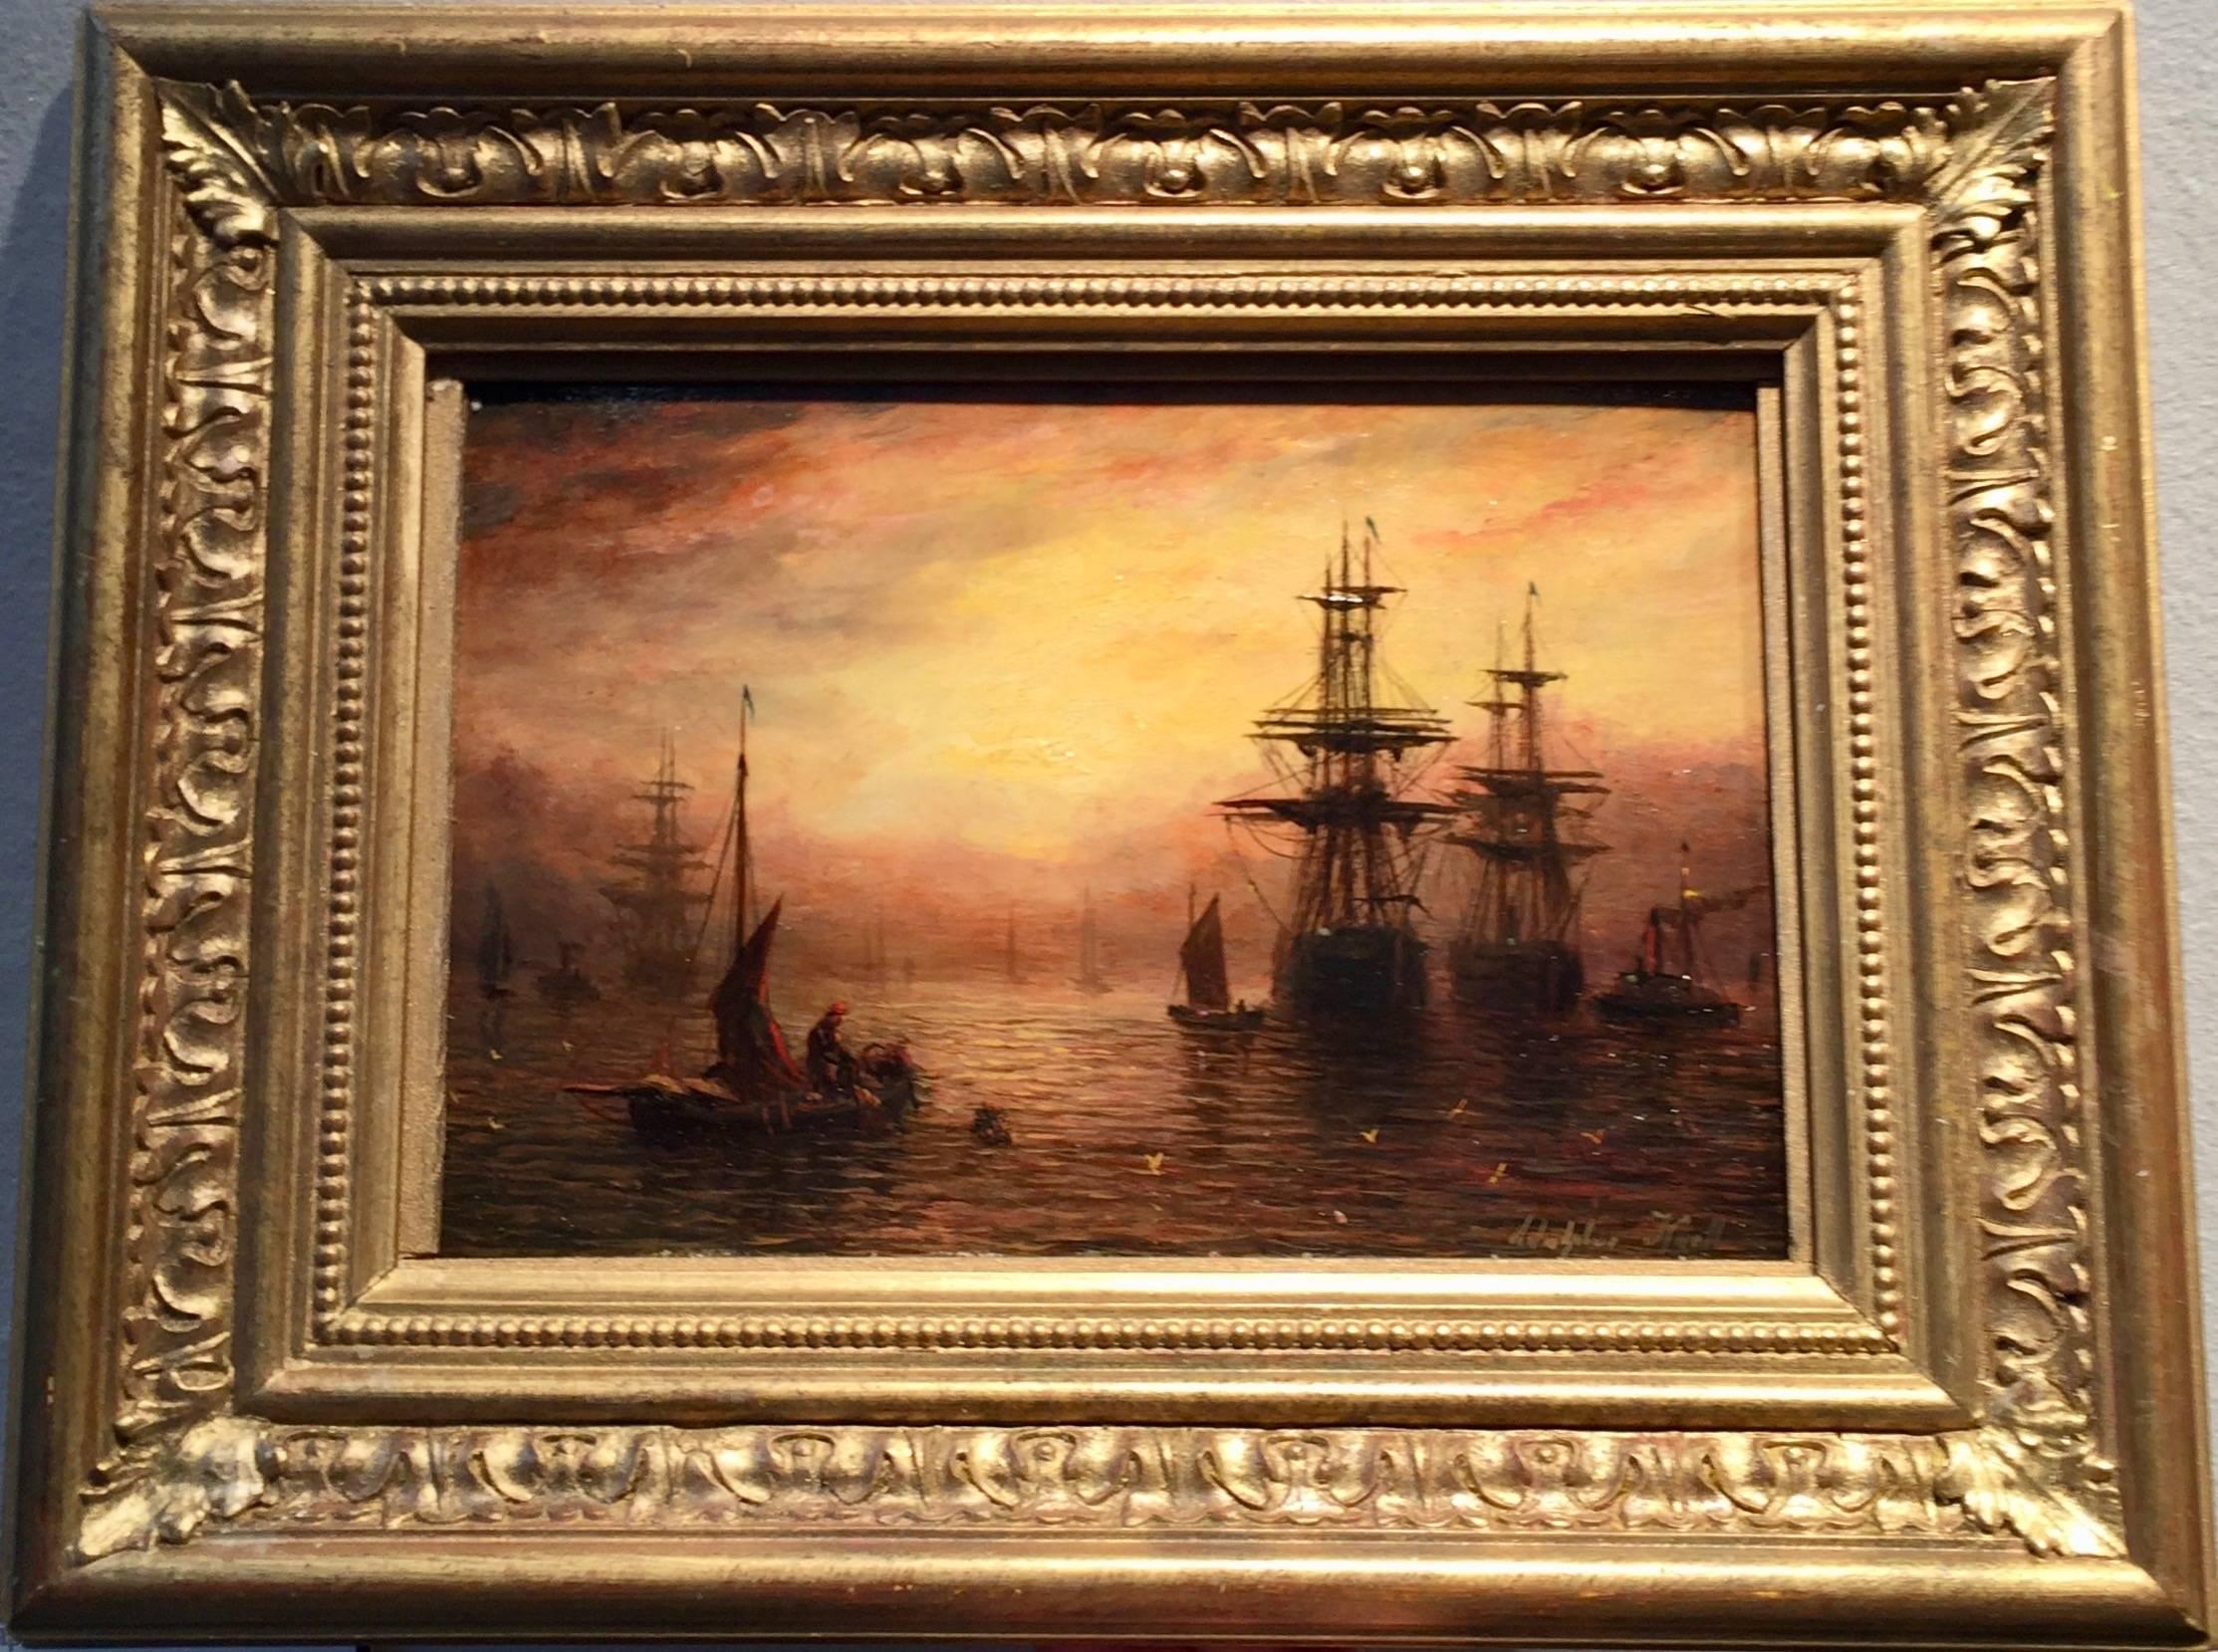 Adolphus Knell Landscape Painting - English marine scene during early evening with the Sun setting